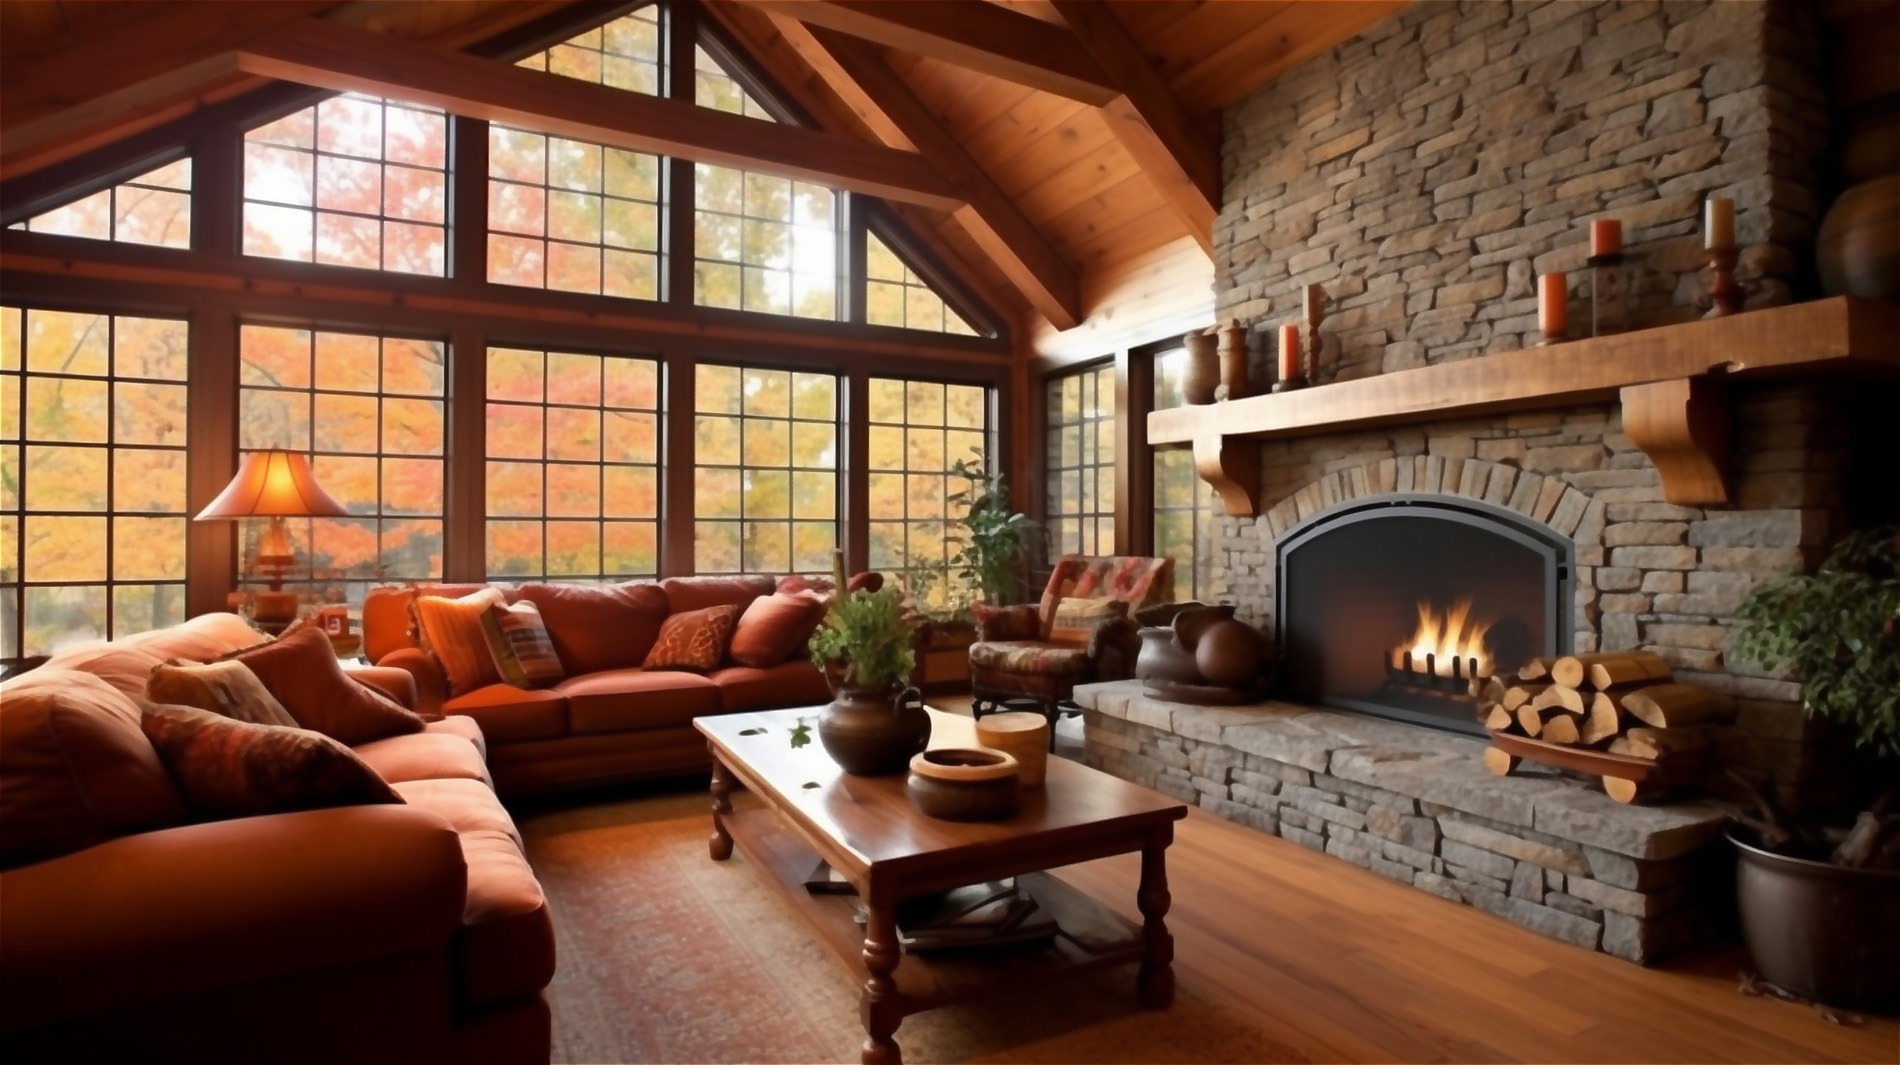 This cozy and inviting living room is inspired by rustic style, with its use of natural materials and warm colors. The walls are painted in a warm earth tone,  the stone or brick fireplace